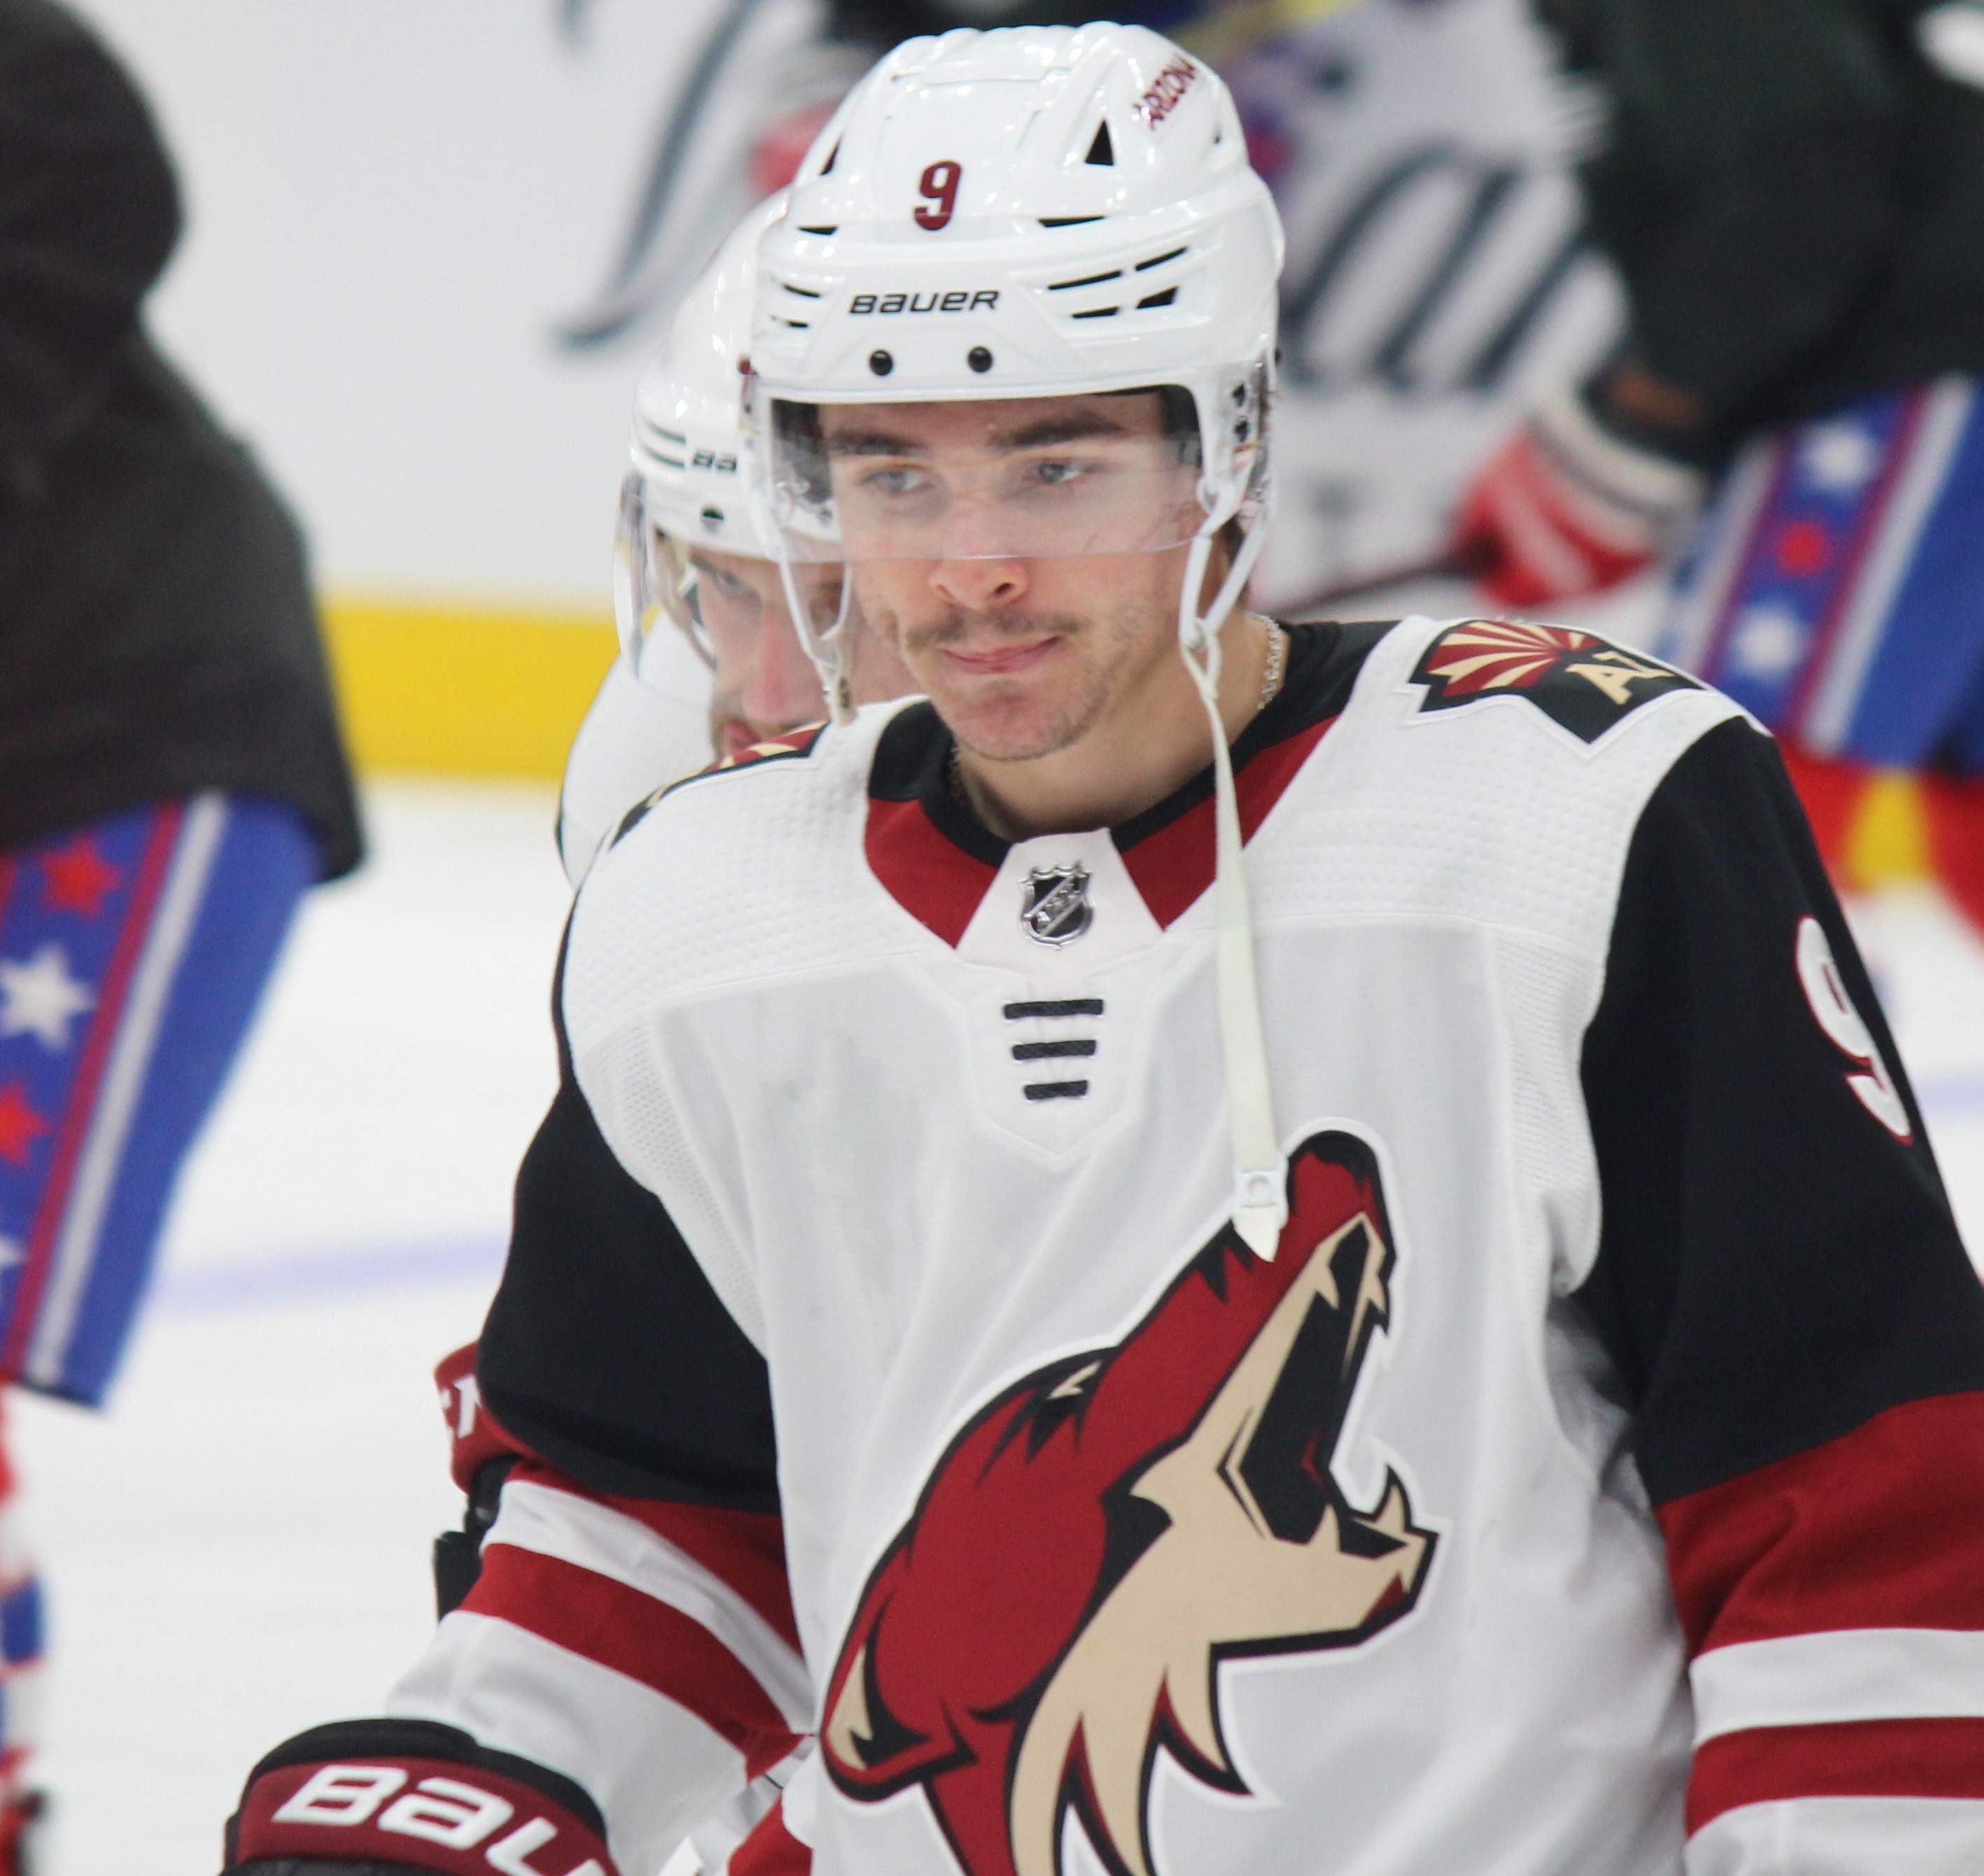 Arizona Coyotes - With an assist in last night's game, Clayton